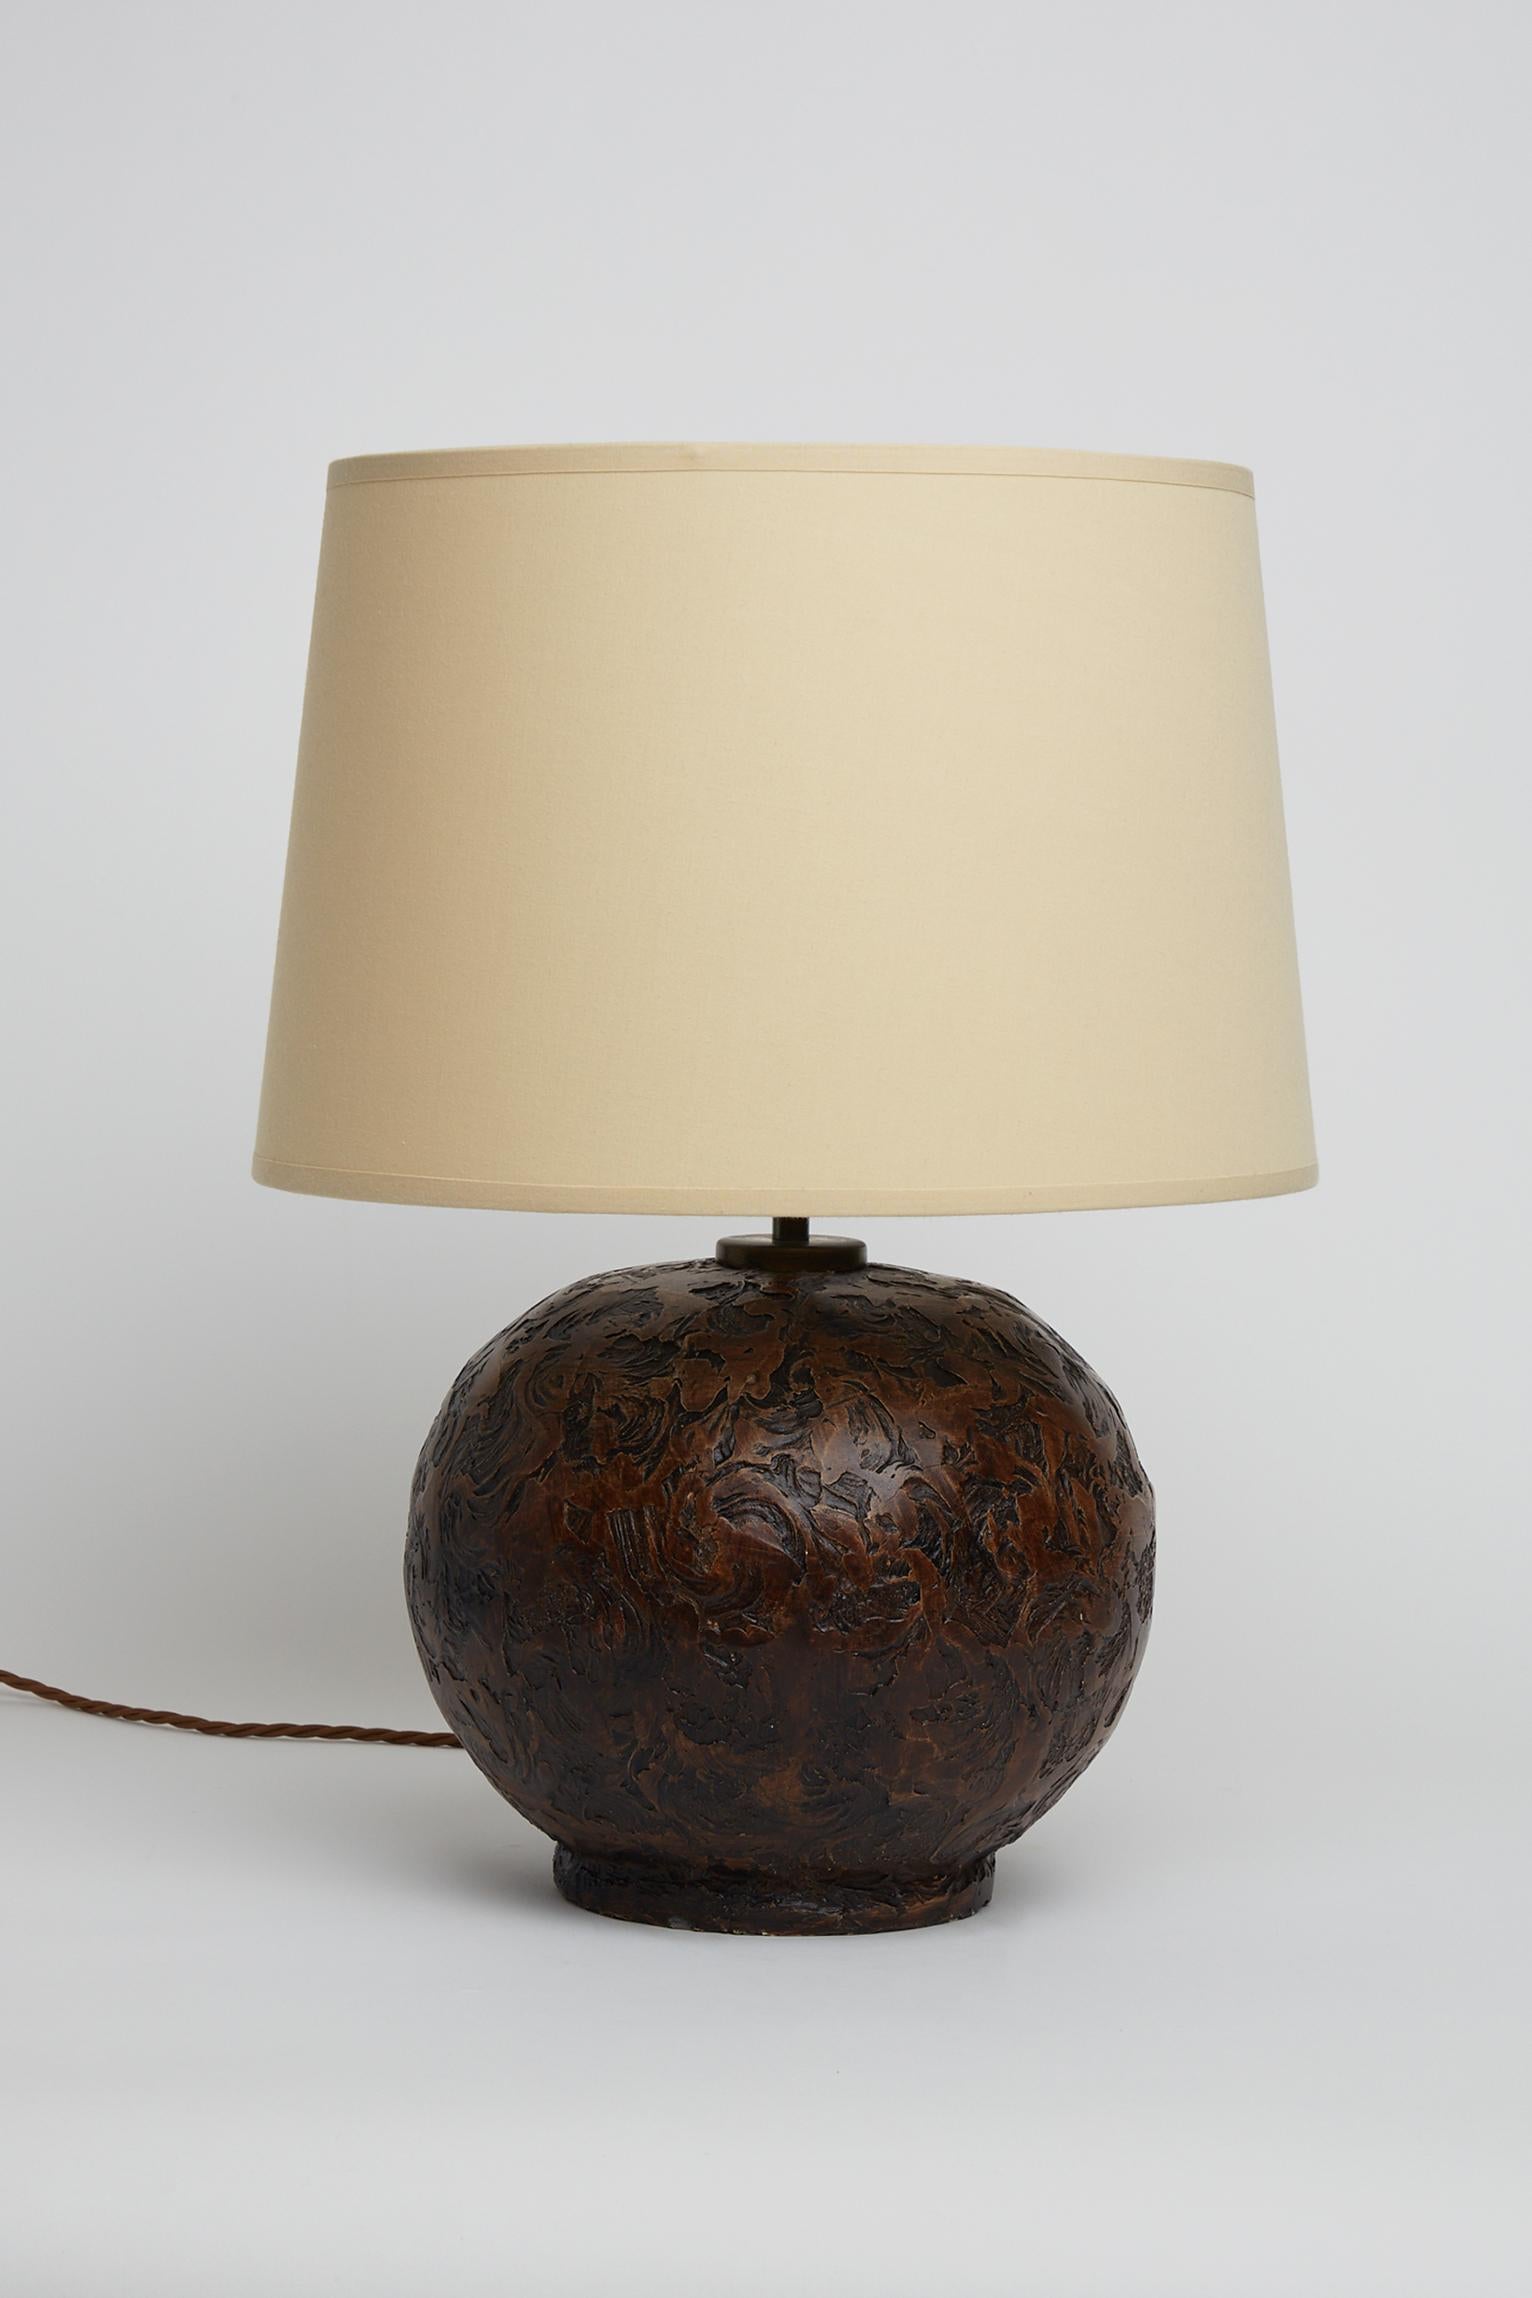 French Art Deco Textured Ceramic Table Lamp